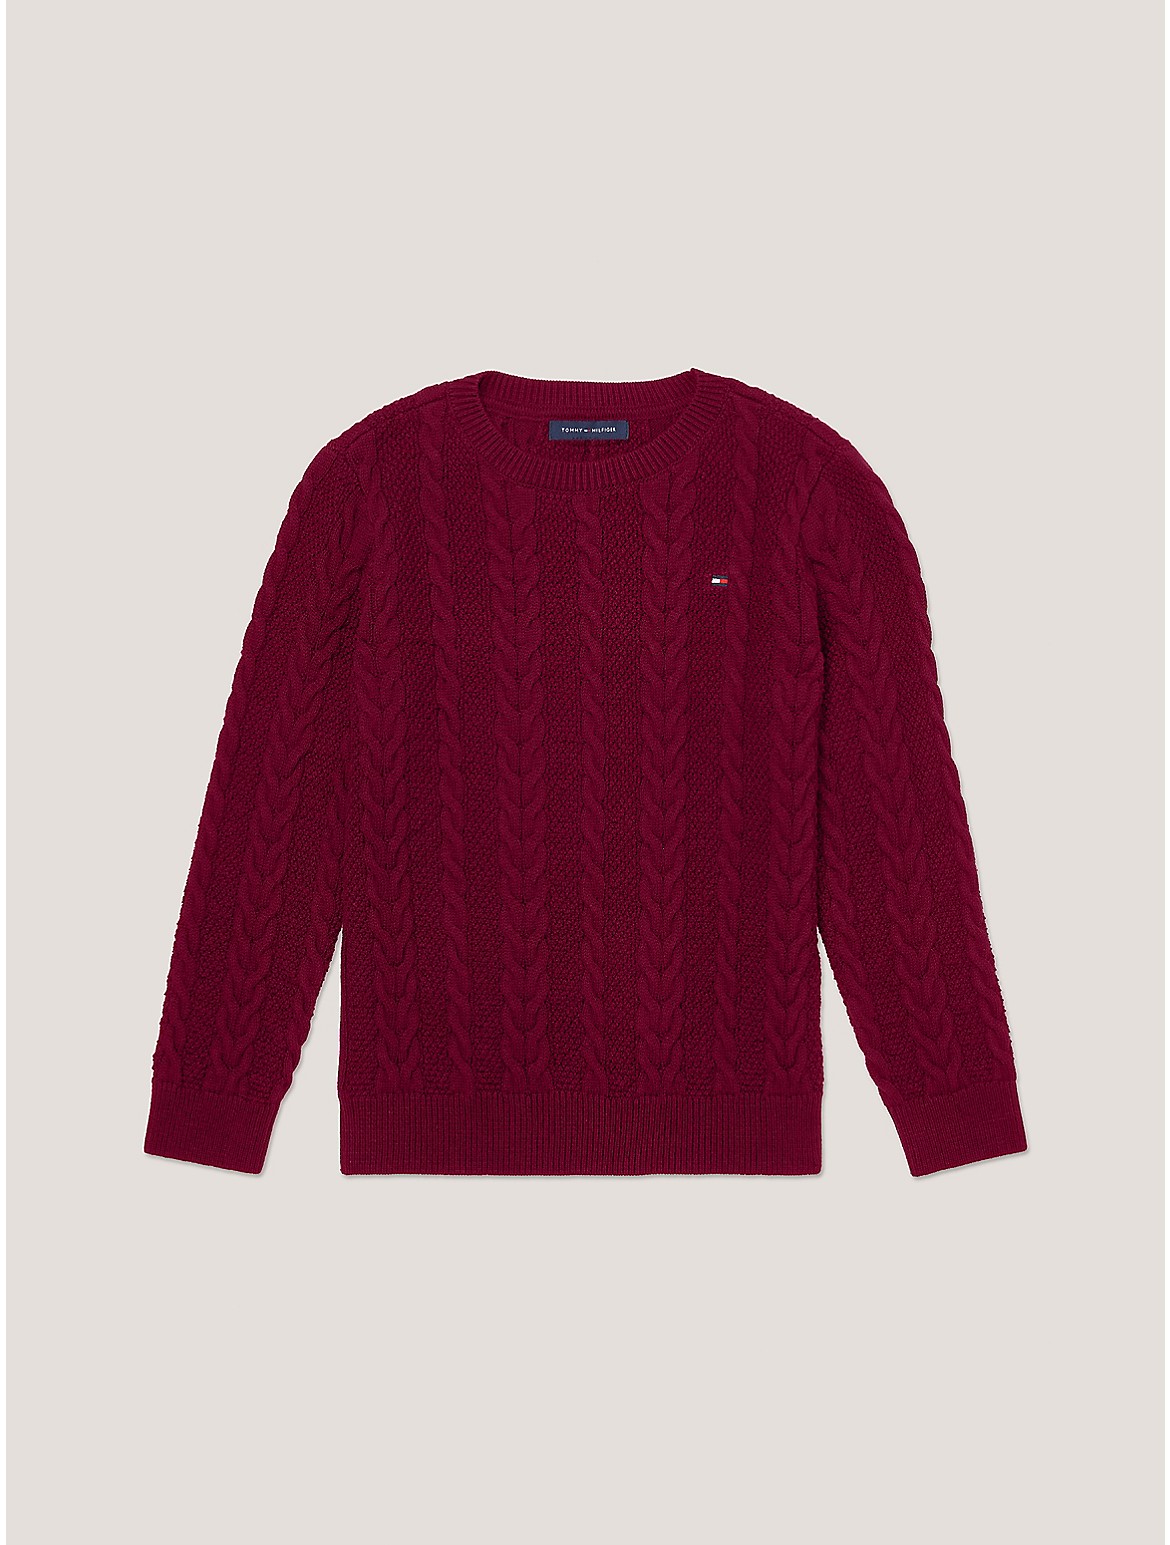 Tommy Hilfiger Boys' Kids' Cable Knit Sweater - Red - M